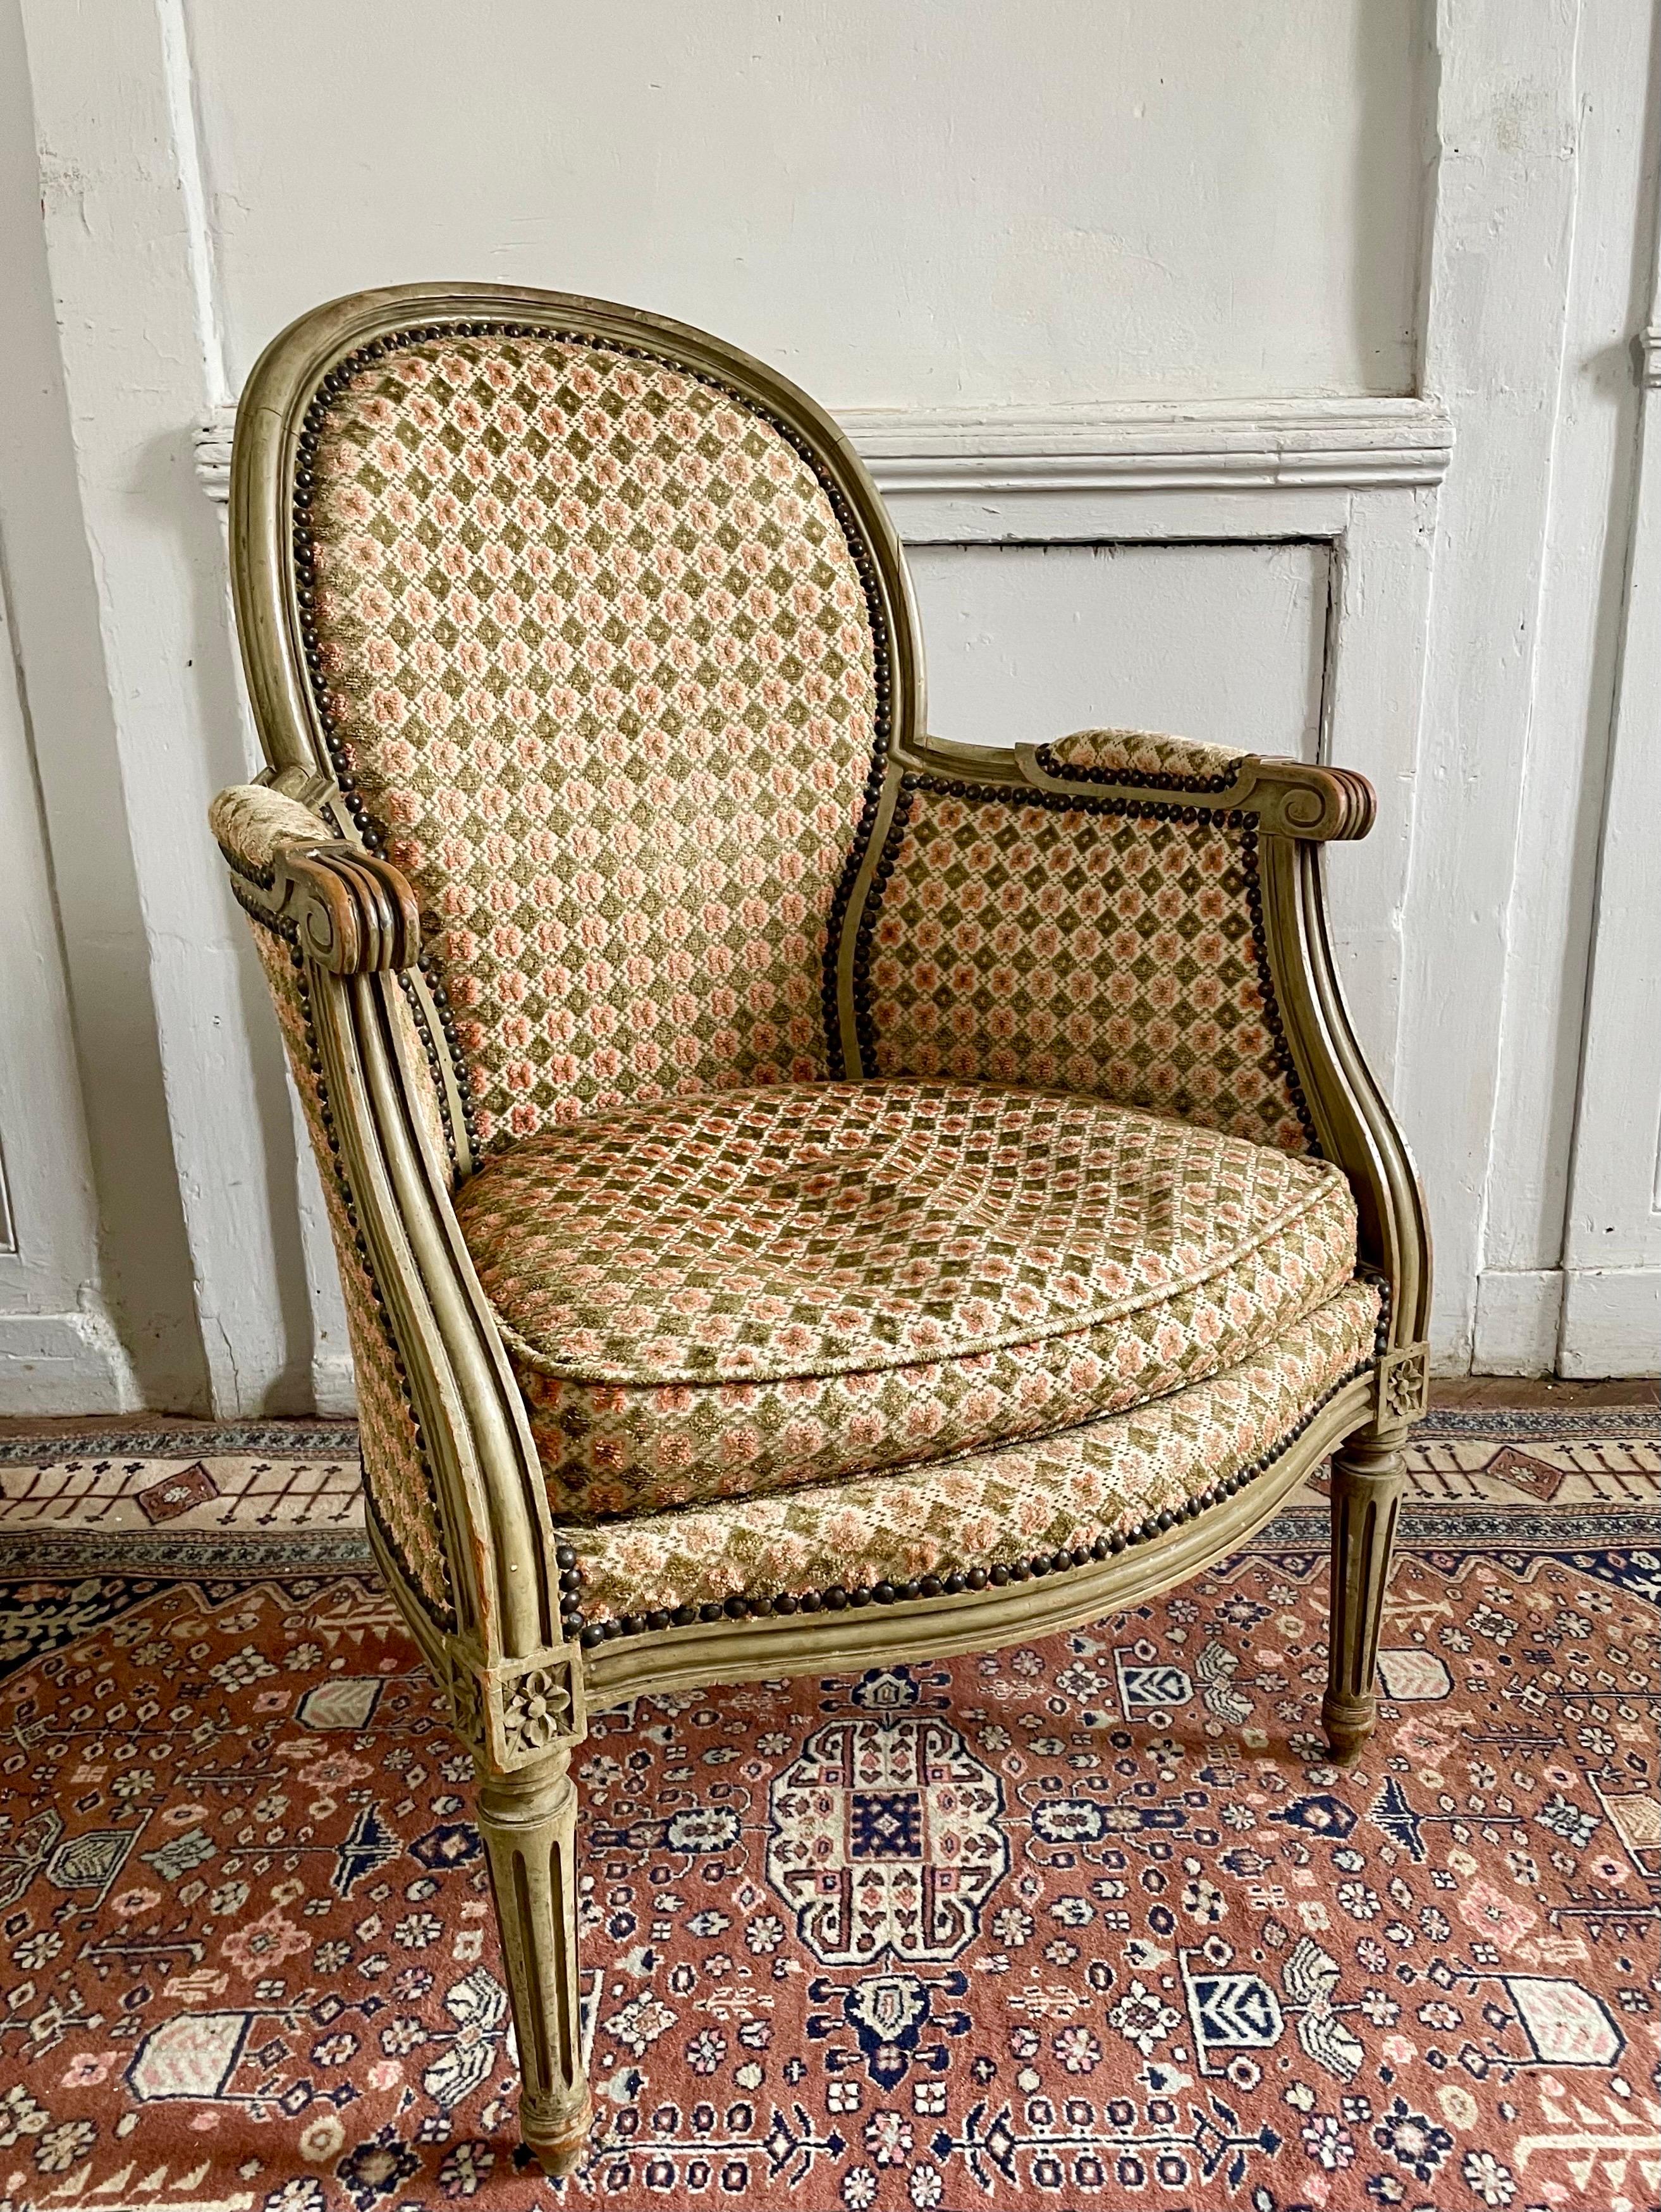 Magnificent pair of Louis XVI style bergere armchairs
19th century
Removable cushions. Tapestries and seats in good condition.
These armchairs perfectly represent the Louis XVI style with their painted and rechampi wooden structure.
The wood is